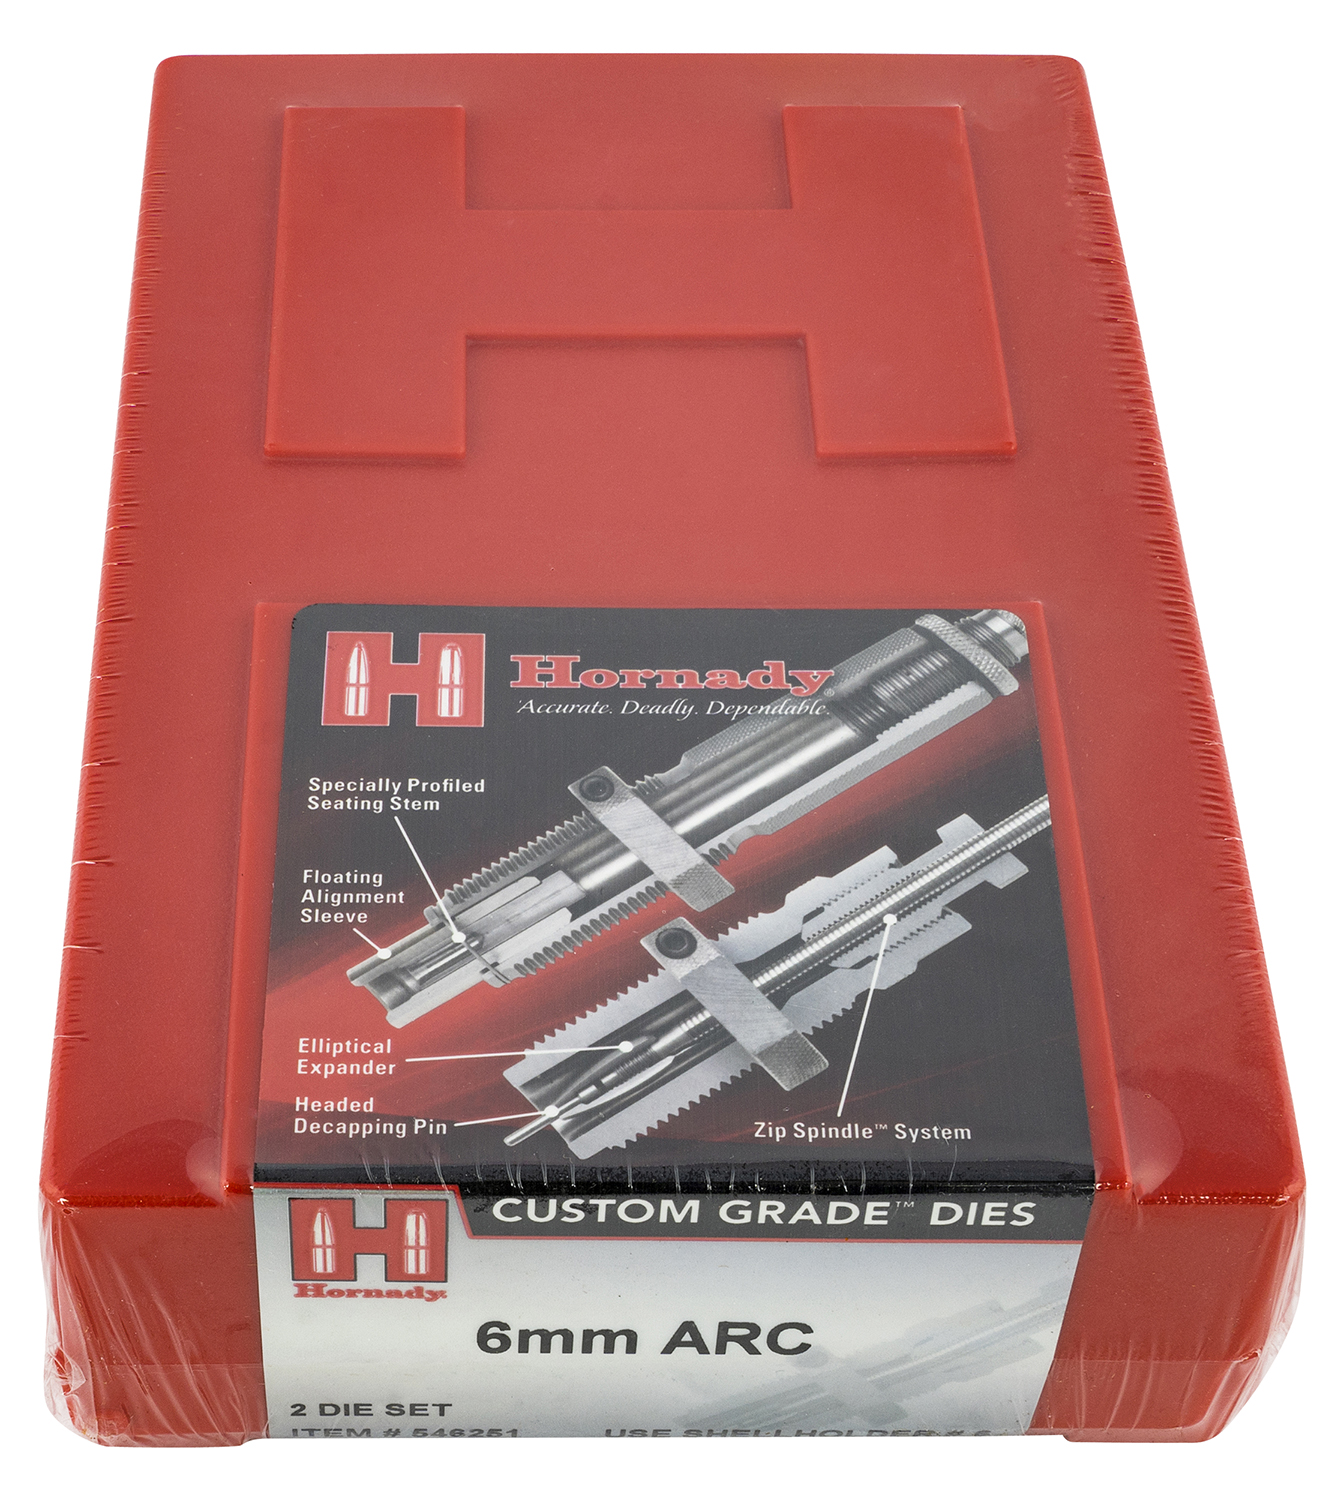 Hornady 546251 Custom Grade Series III 2-Die Set for 6mm ARC Includes Sizing/Seater